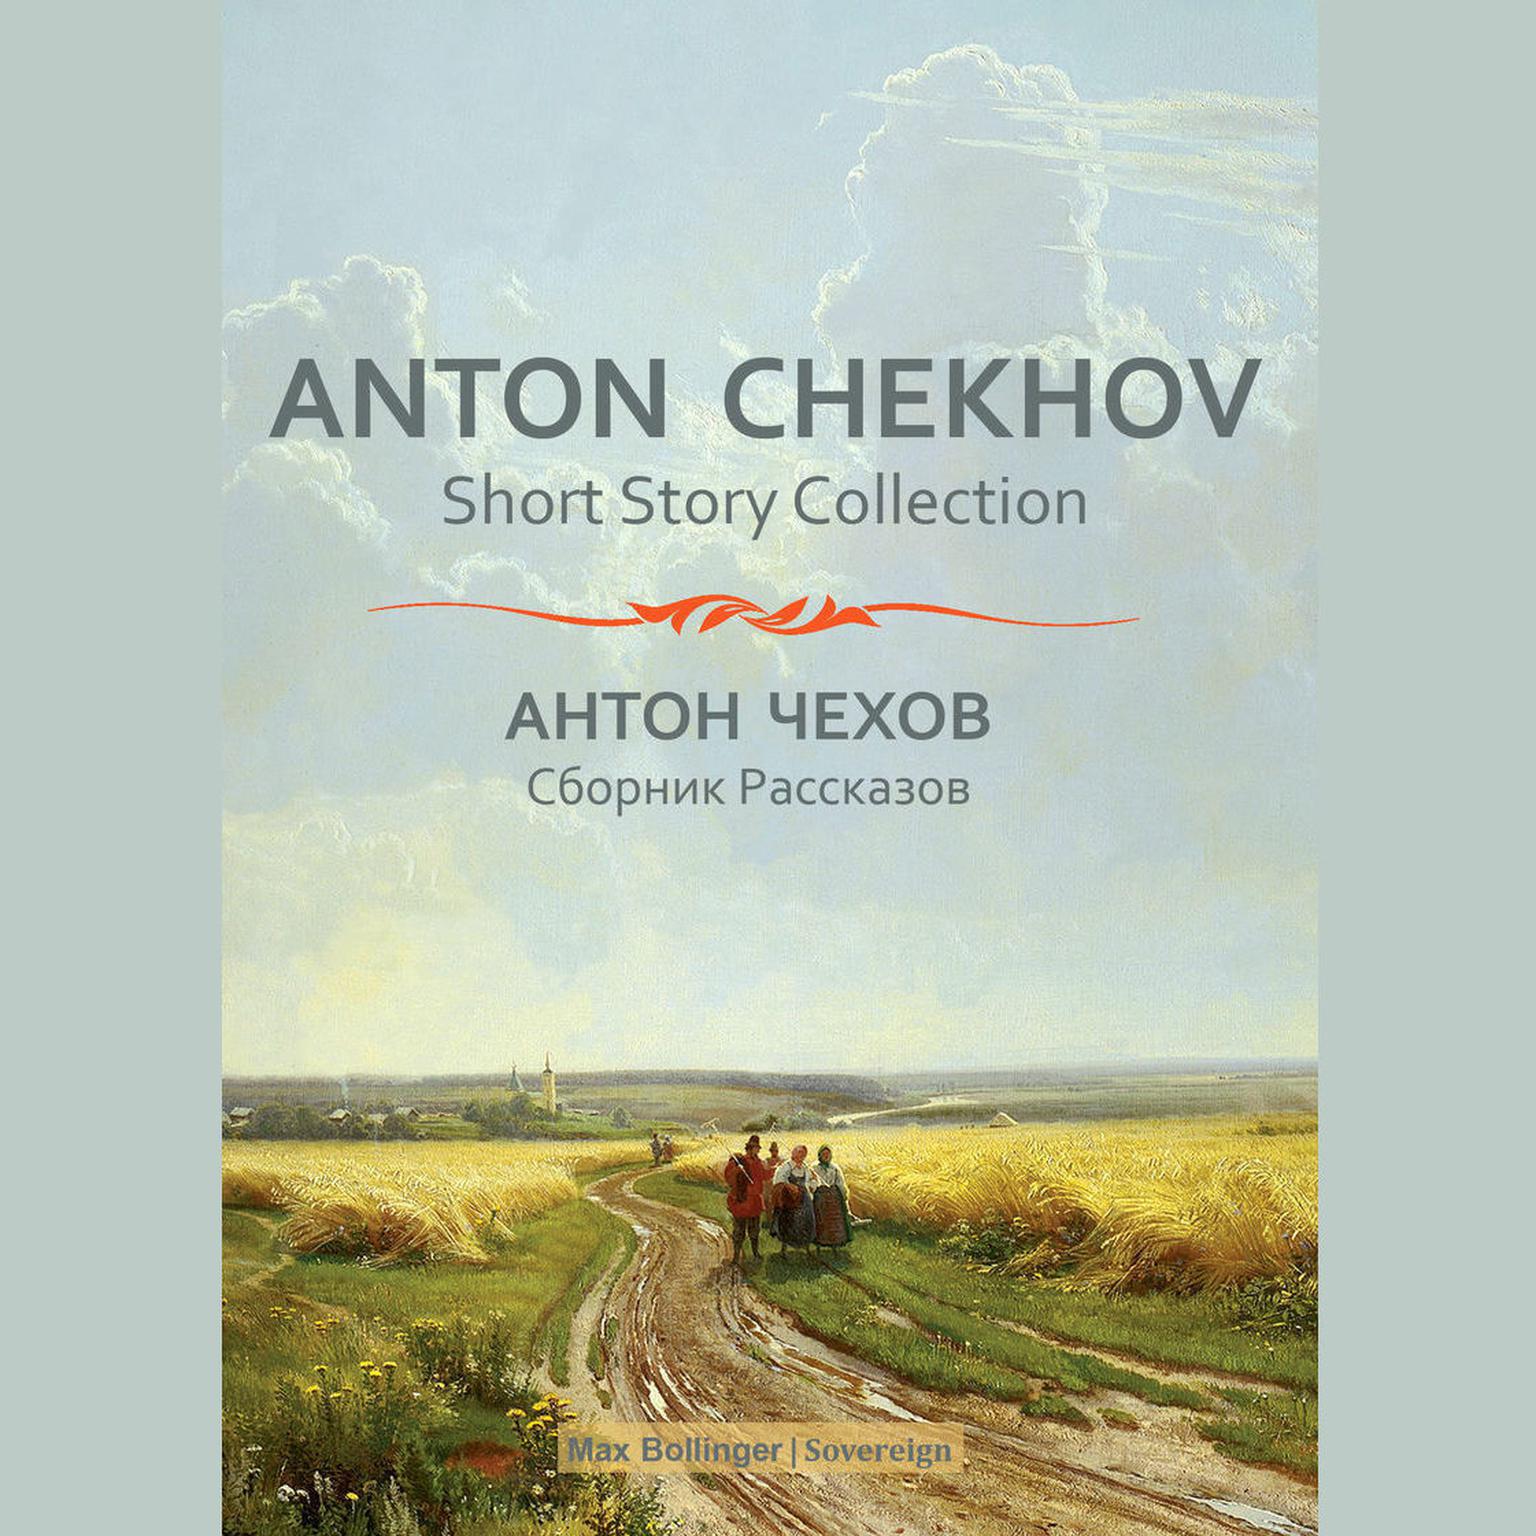 Anton Chekhov Short Story Collection: In A Strange Land and Other Stories Audiobook, by Anton Chekhov